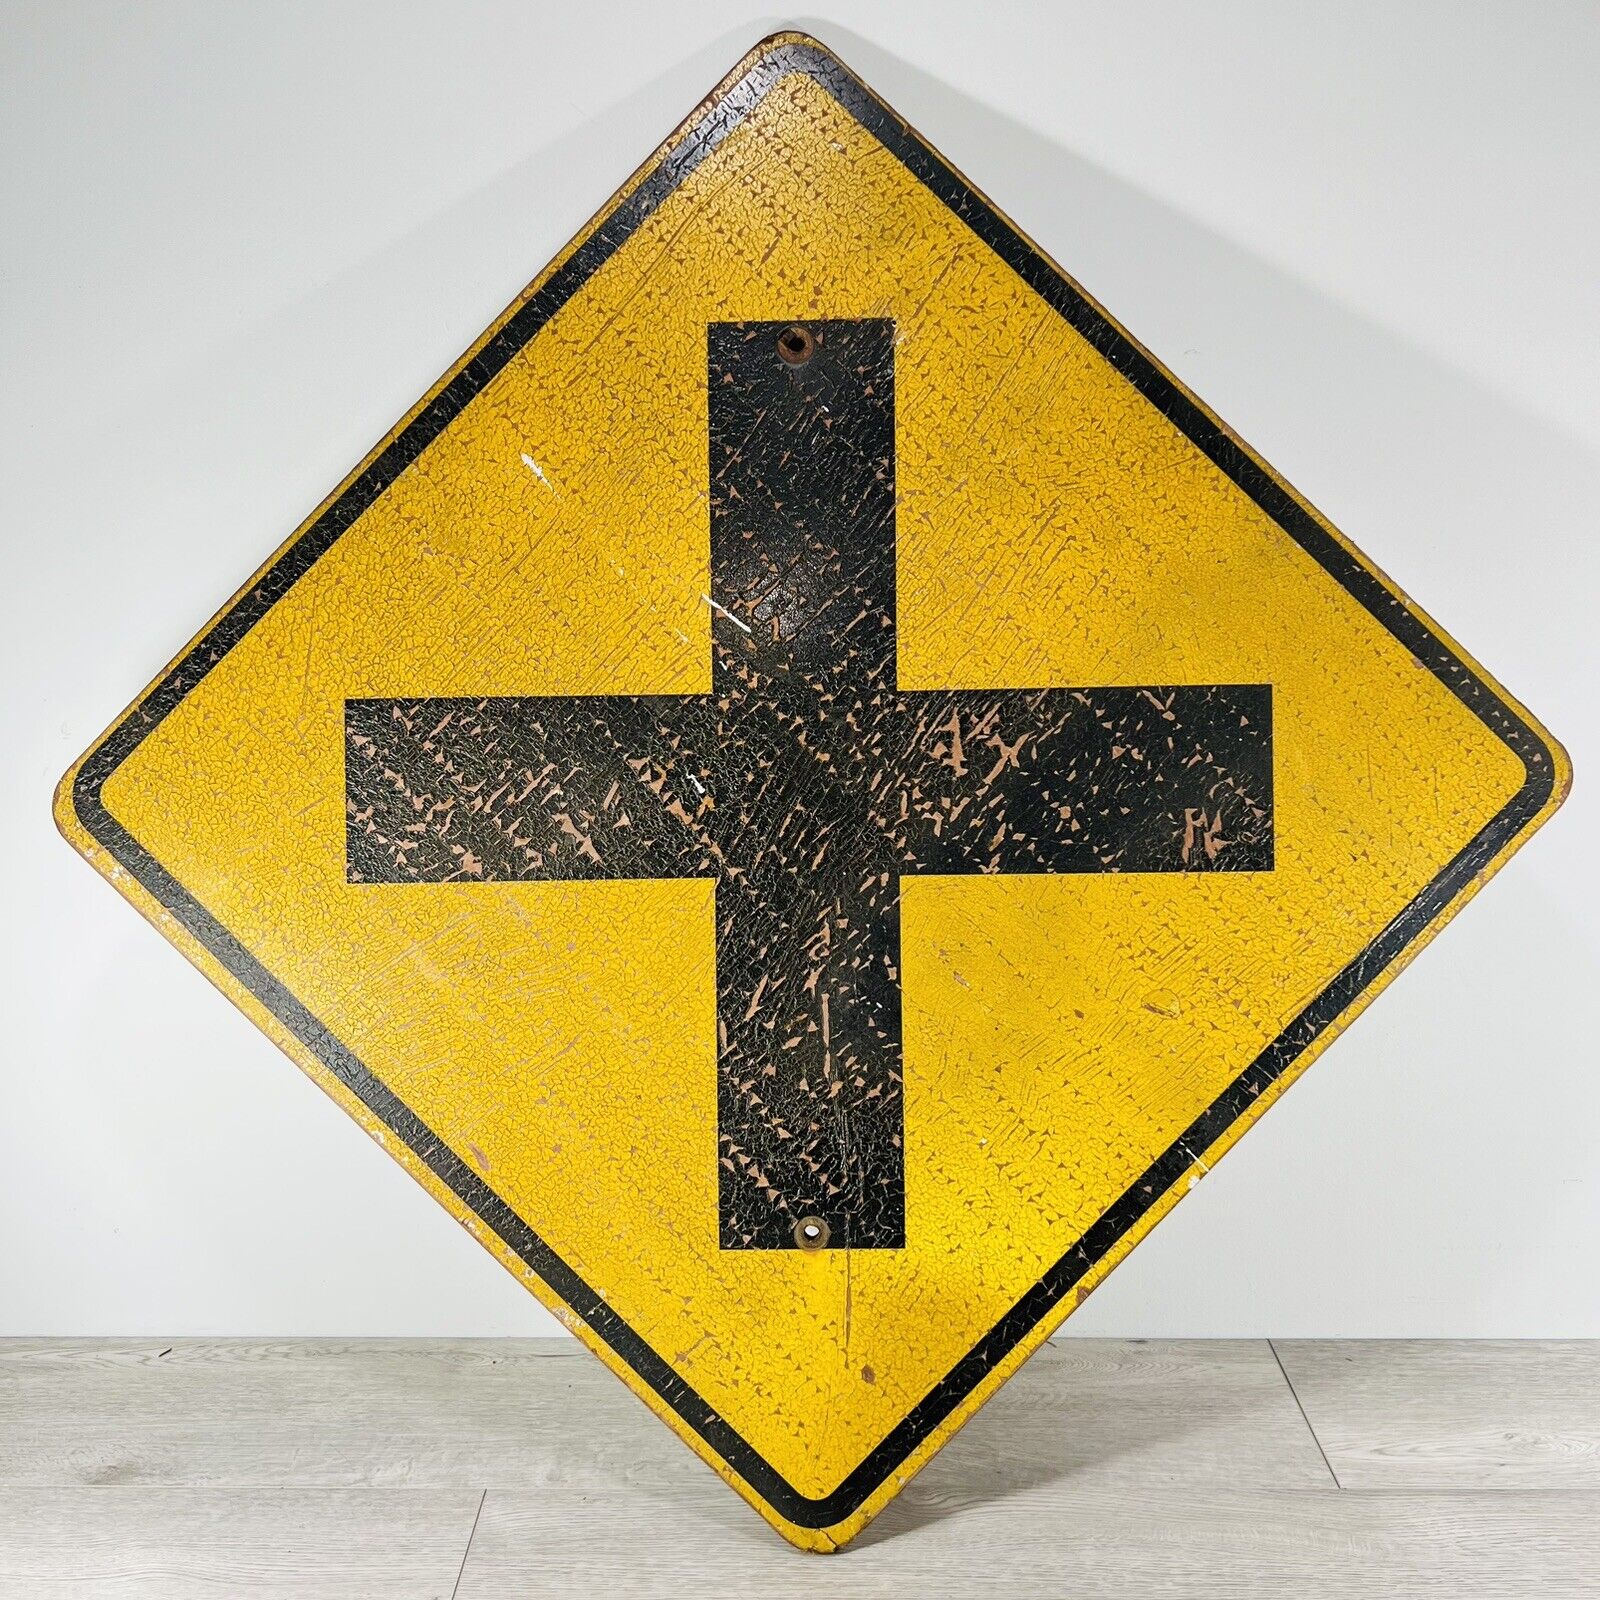 Vintage THICK WOOD Intersection Ahead Road Traffic Sign 30x30 Gas Oil